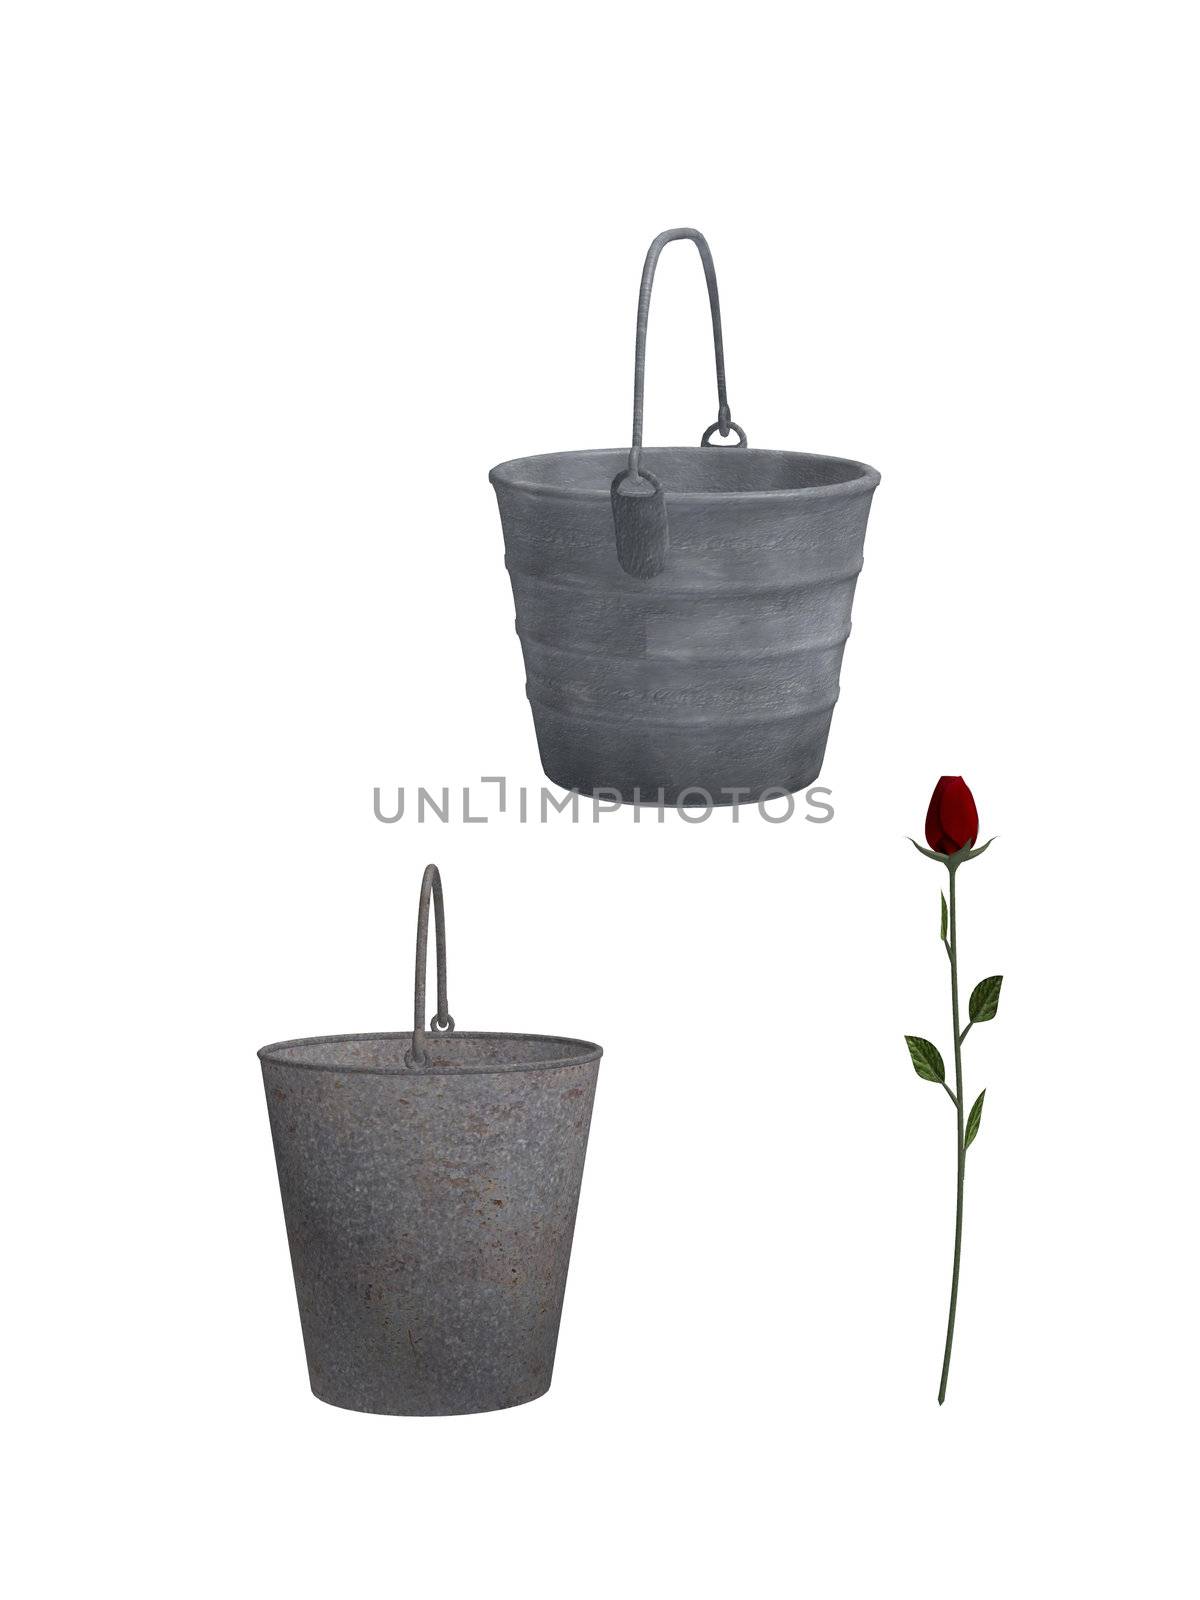 Two buckets and a rose by kathygold